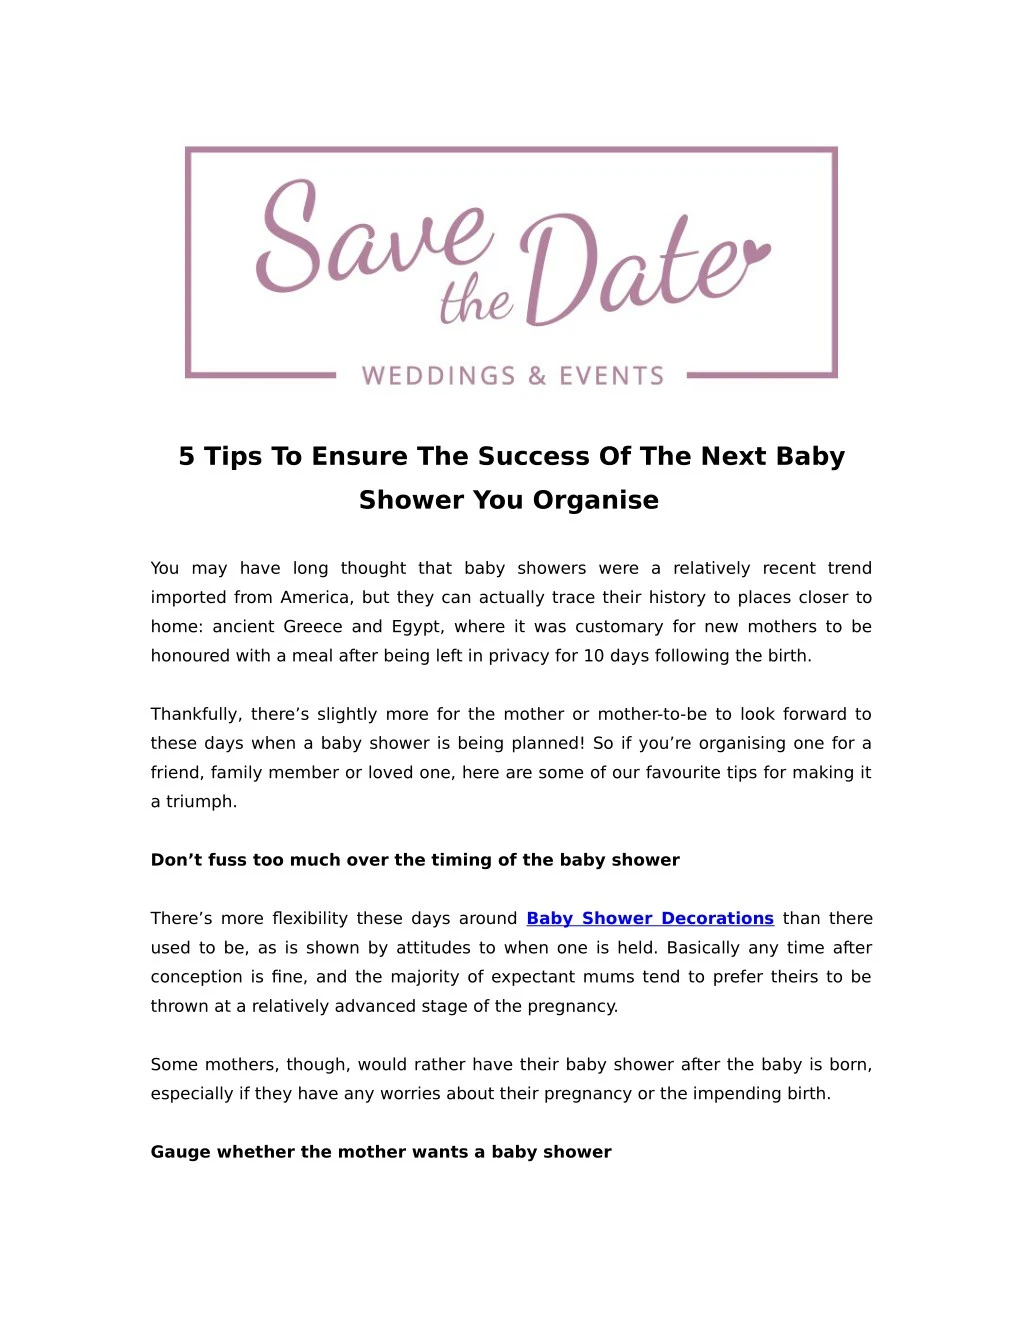 5 tips to ensure the success of the next baby